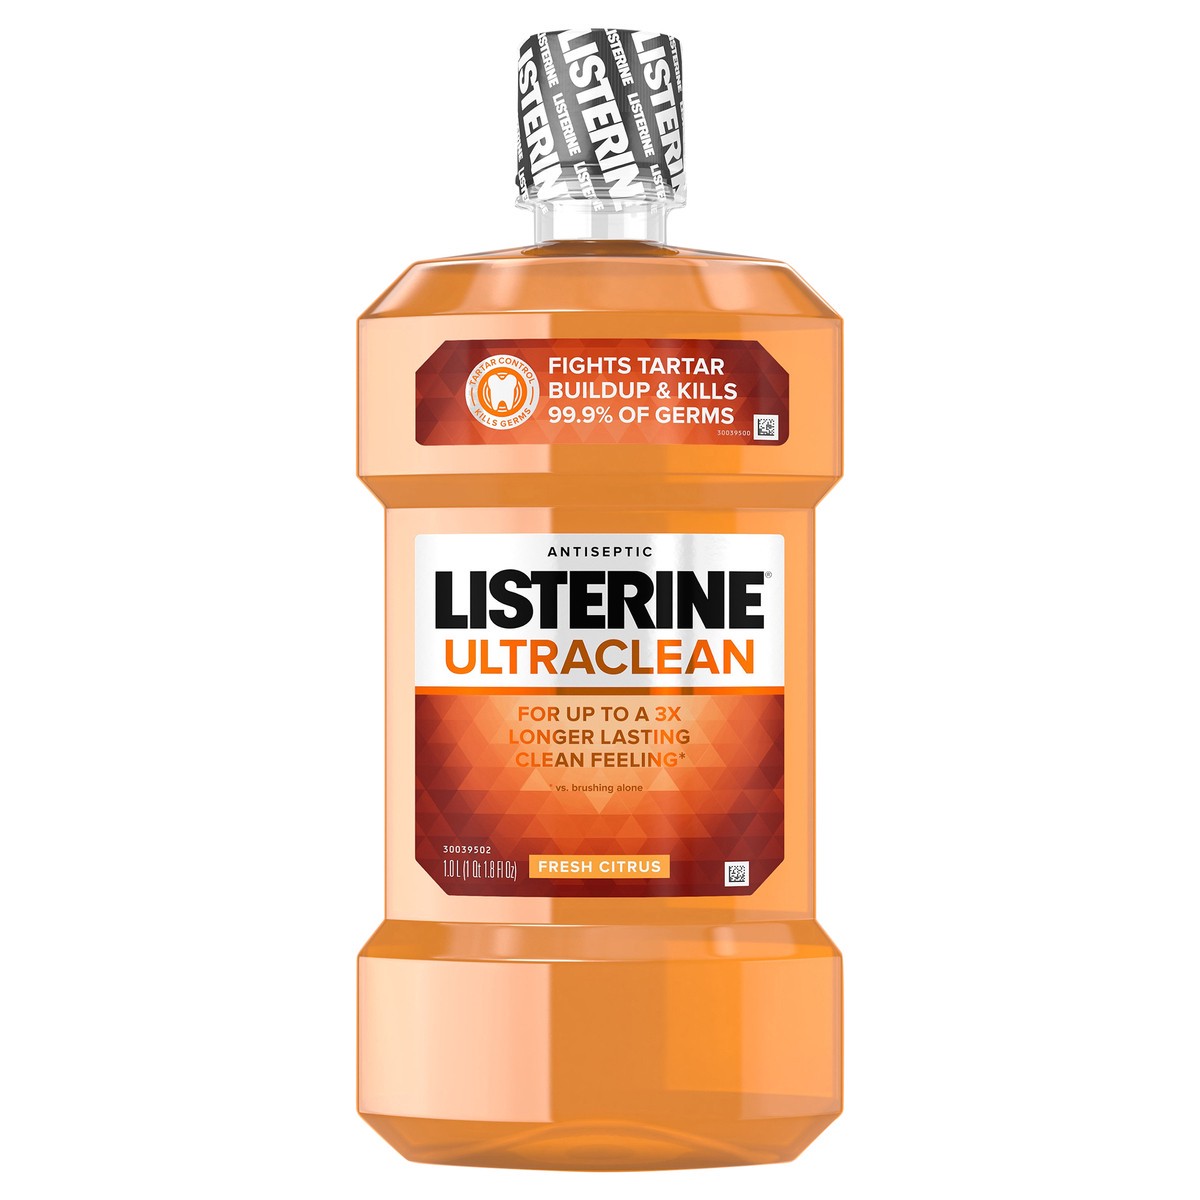 slide 1 of 7, Listerine Ultraclean Oral Care Antiseptic Mouthwash with Everfresh Technology to Help Fight Bad Breath, Gingivitis, Plaque and Tartar, Fresh Citrus, 1 L, 1 liter